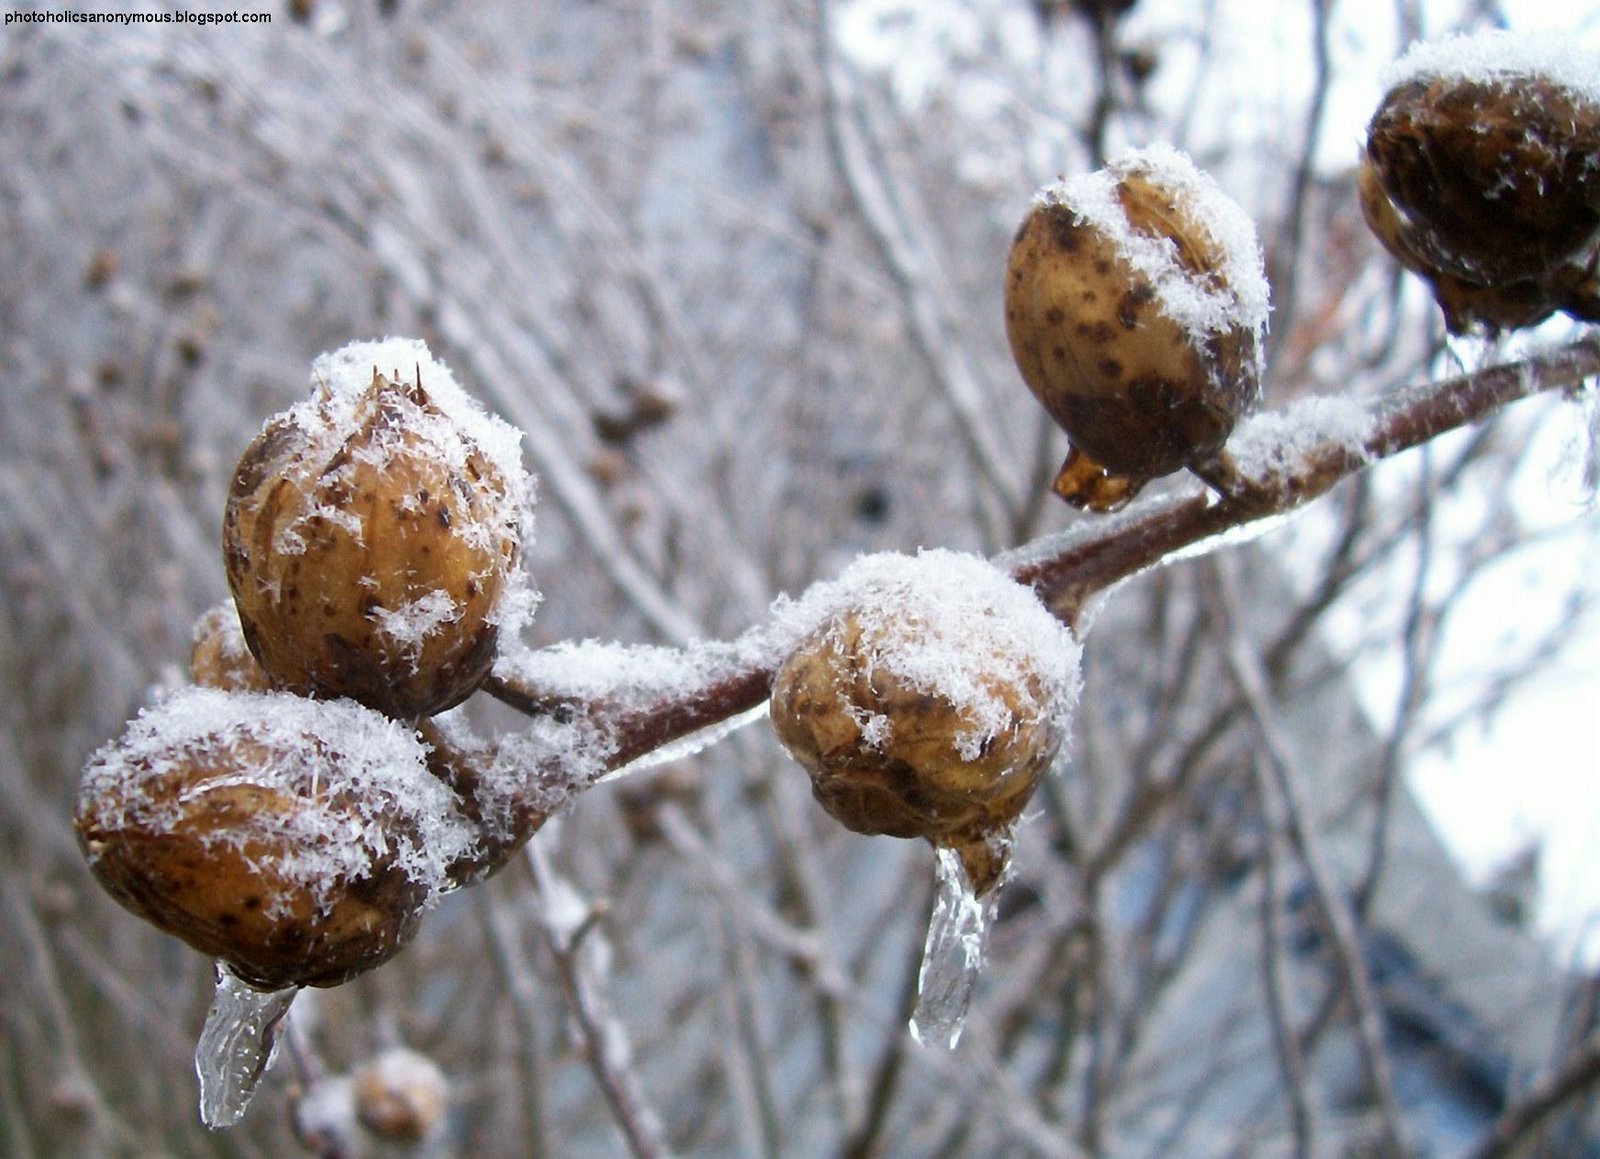 [Rose+Of+Sharon+Pods+With+Snow.jpg]